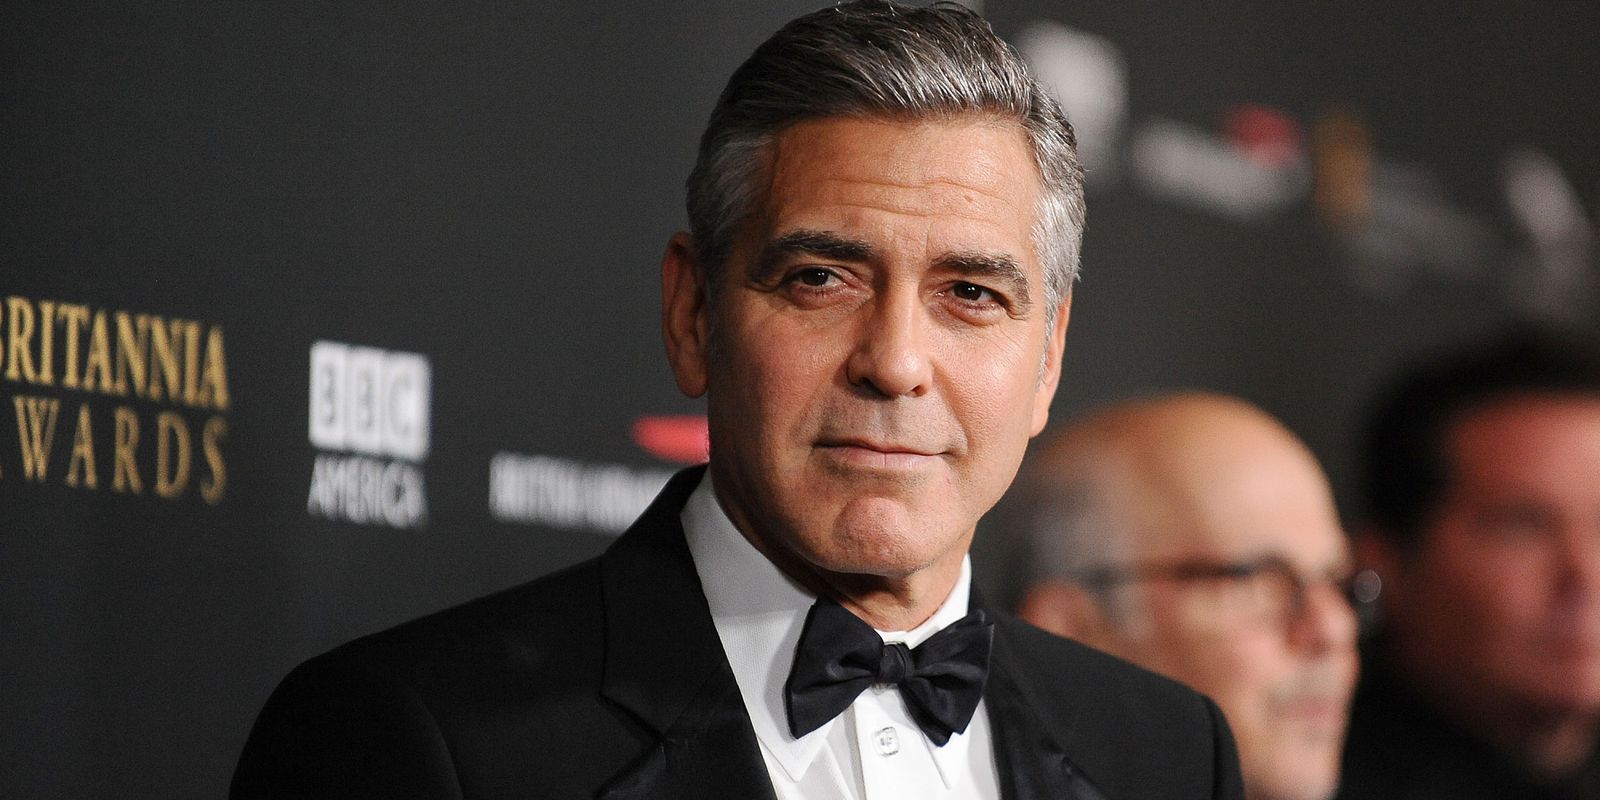 George Clooney Uses His Fame To Get Global Injustice Under The Spotlight